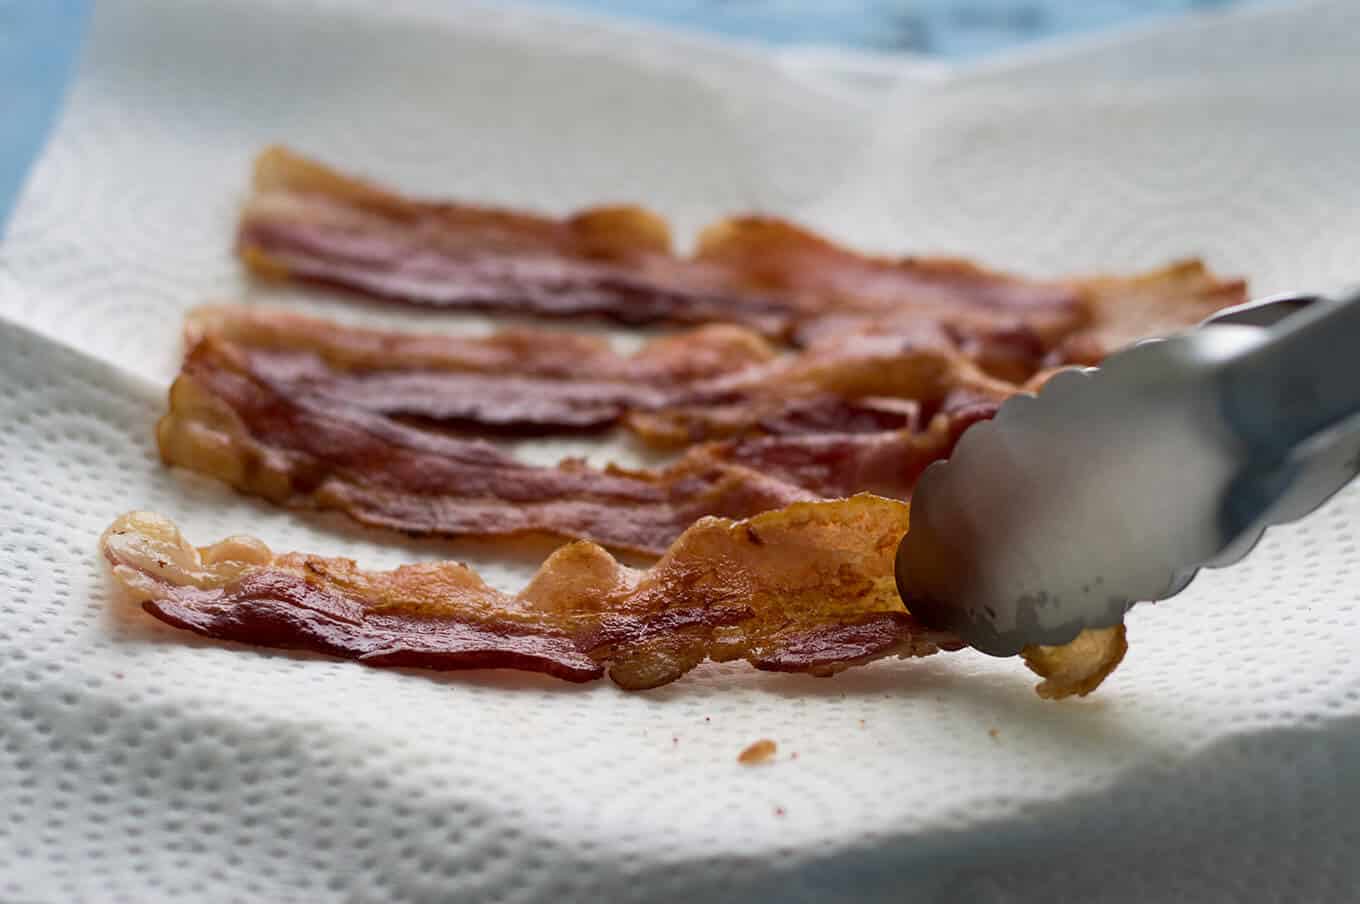 Slices of cooked bacon on a paper towel-lined plate.